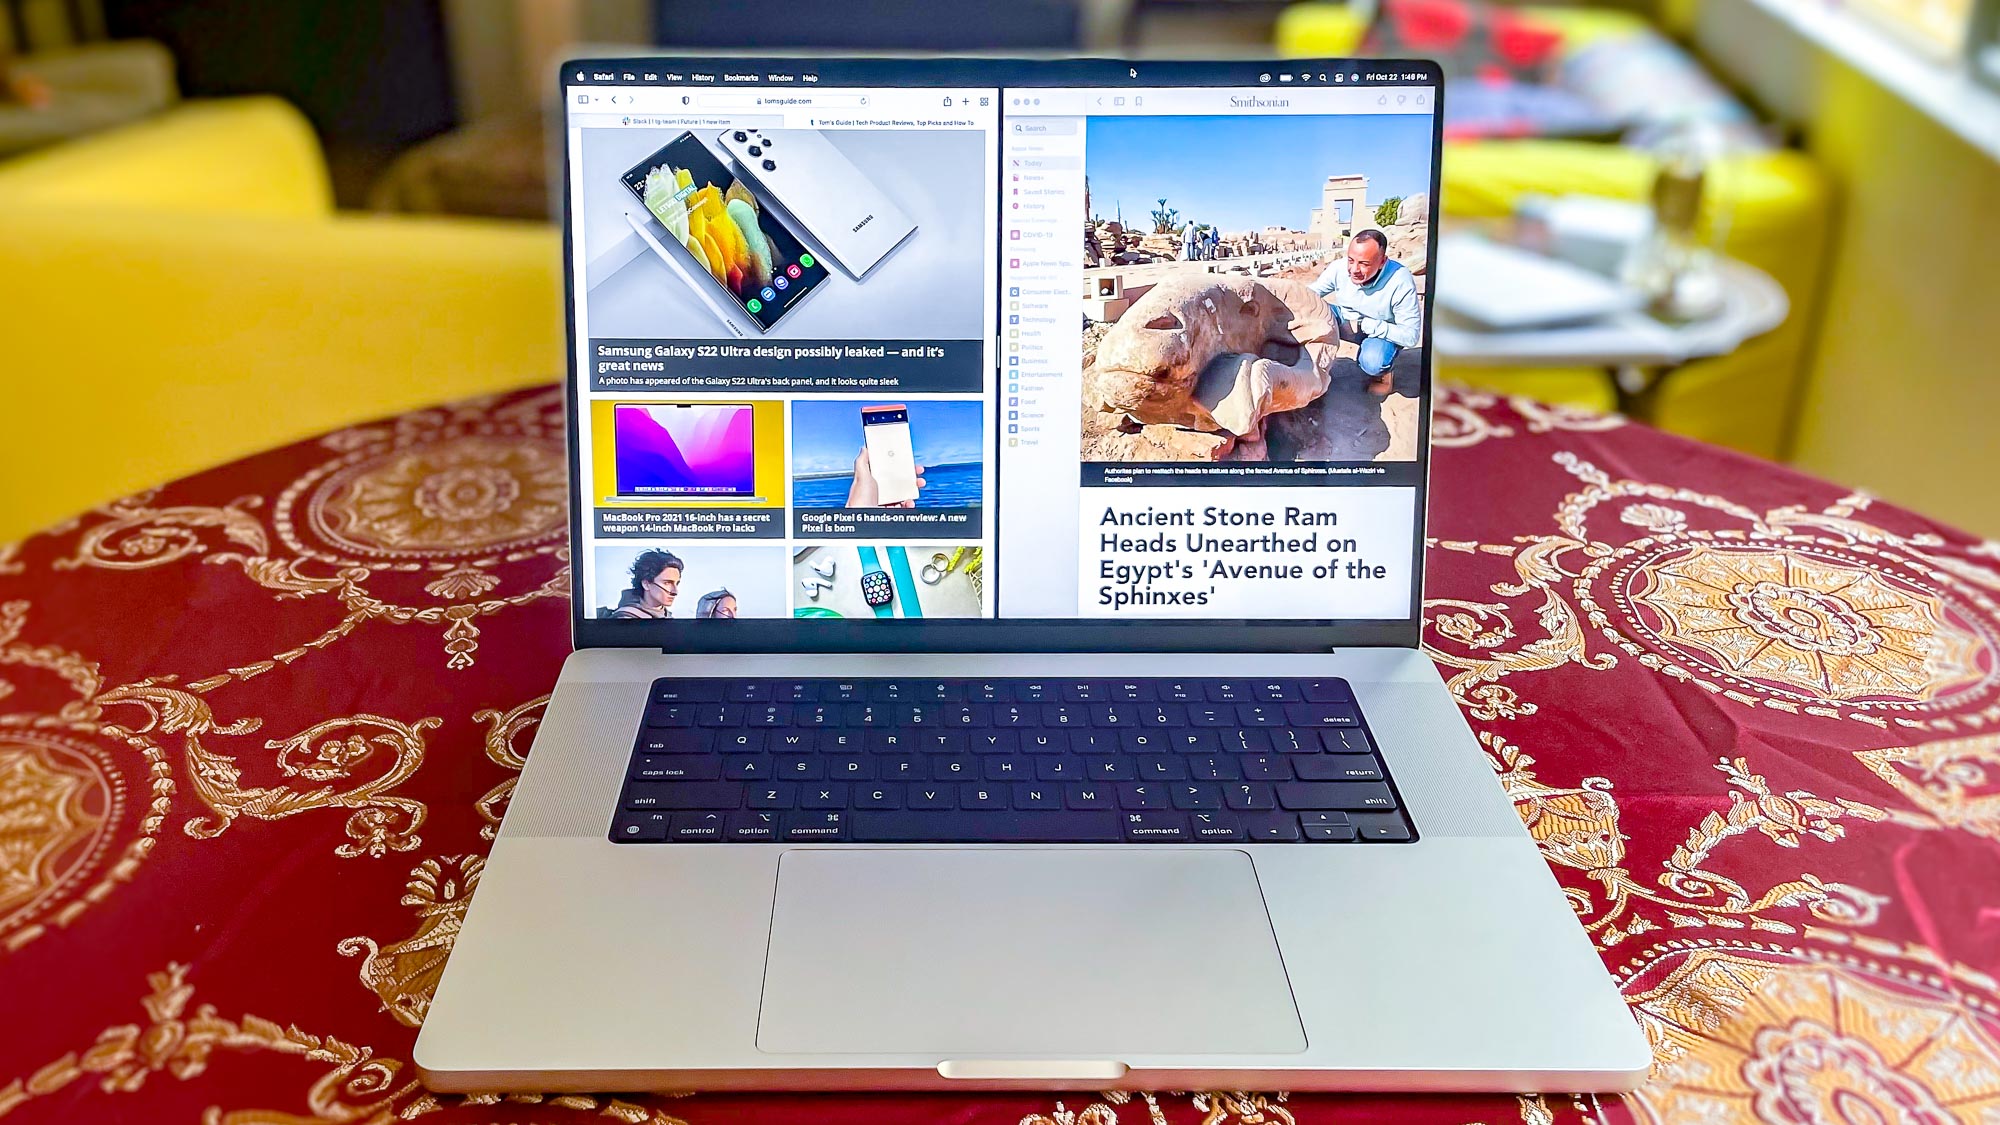 MacBook Pro 2021 (16-inch) sitting at a table showing two web pages side by side